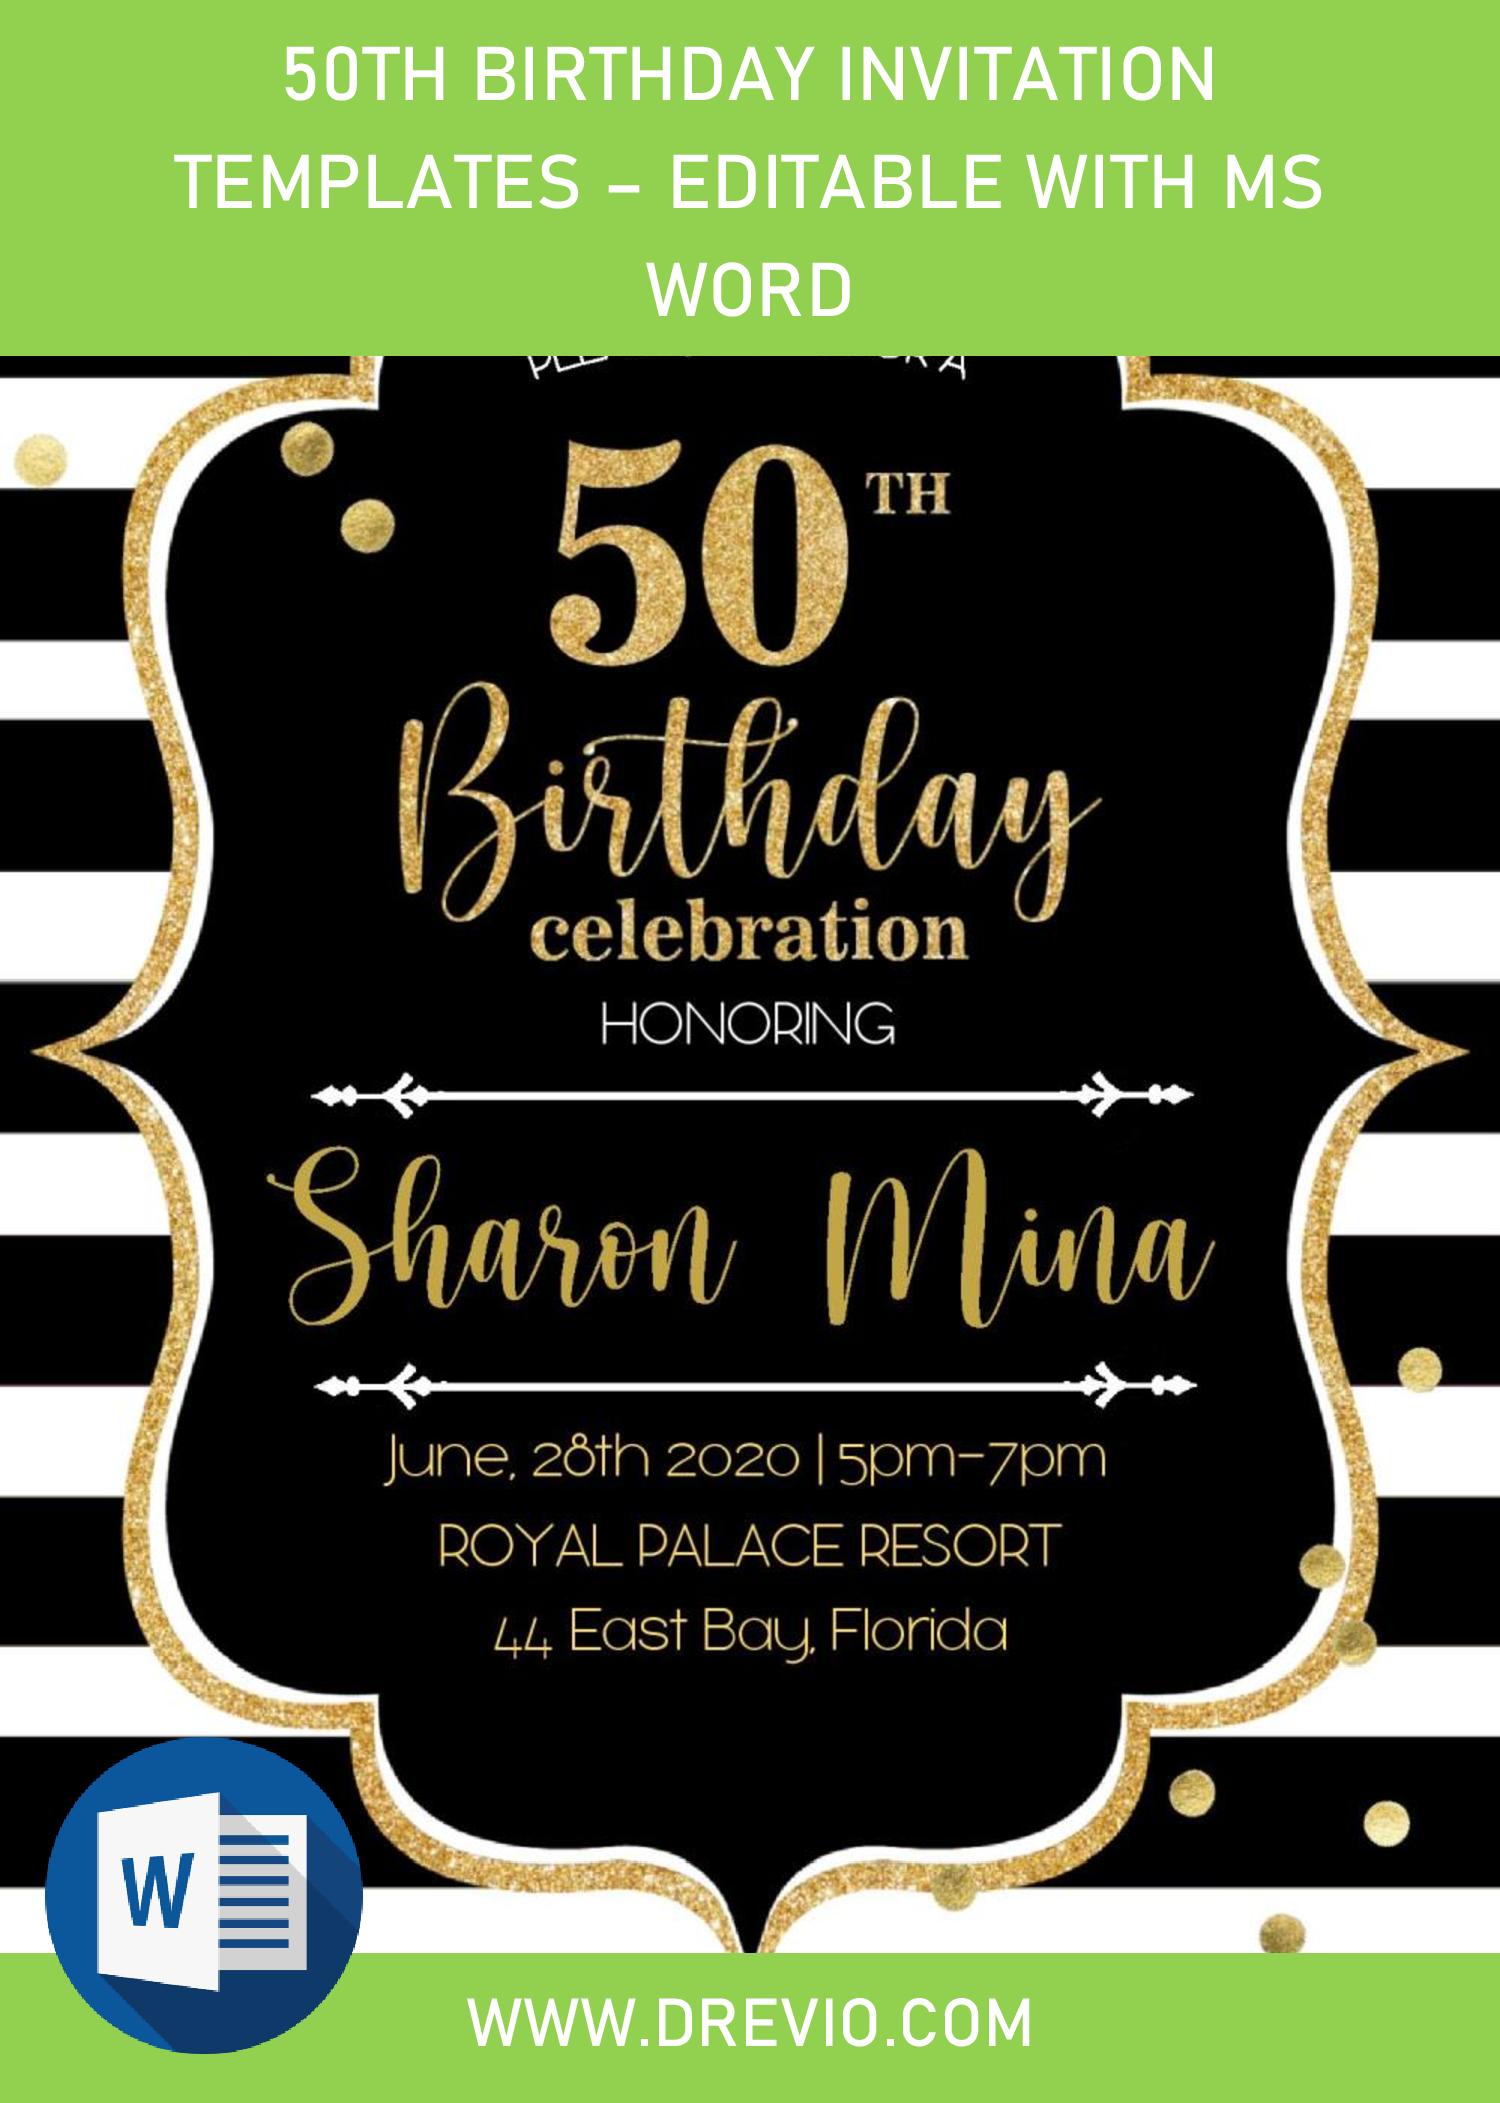 Black And Gold 50th Birthday Invitation Templates – Editable With MS Word |  Download Hundreds FREE PRINTABLE Birthday Invitation Templates